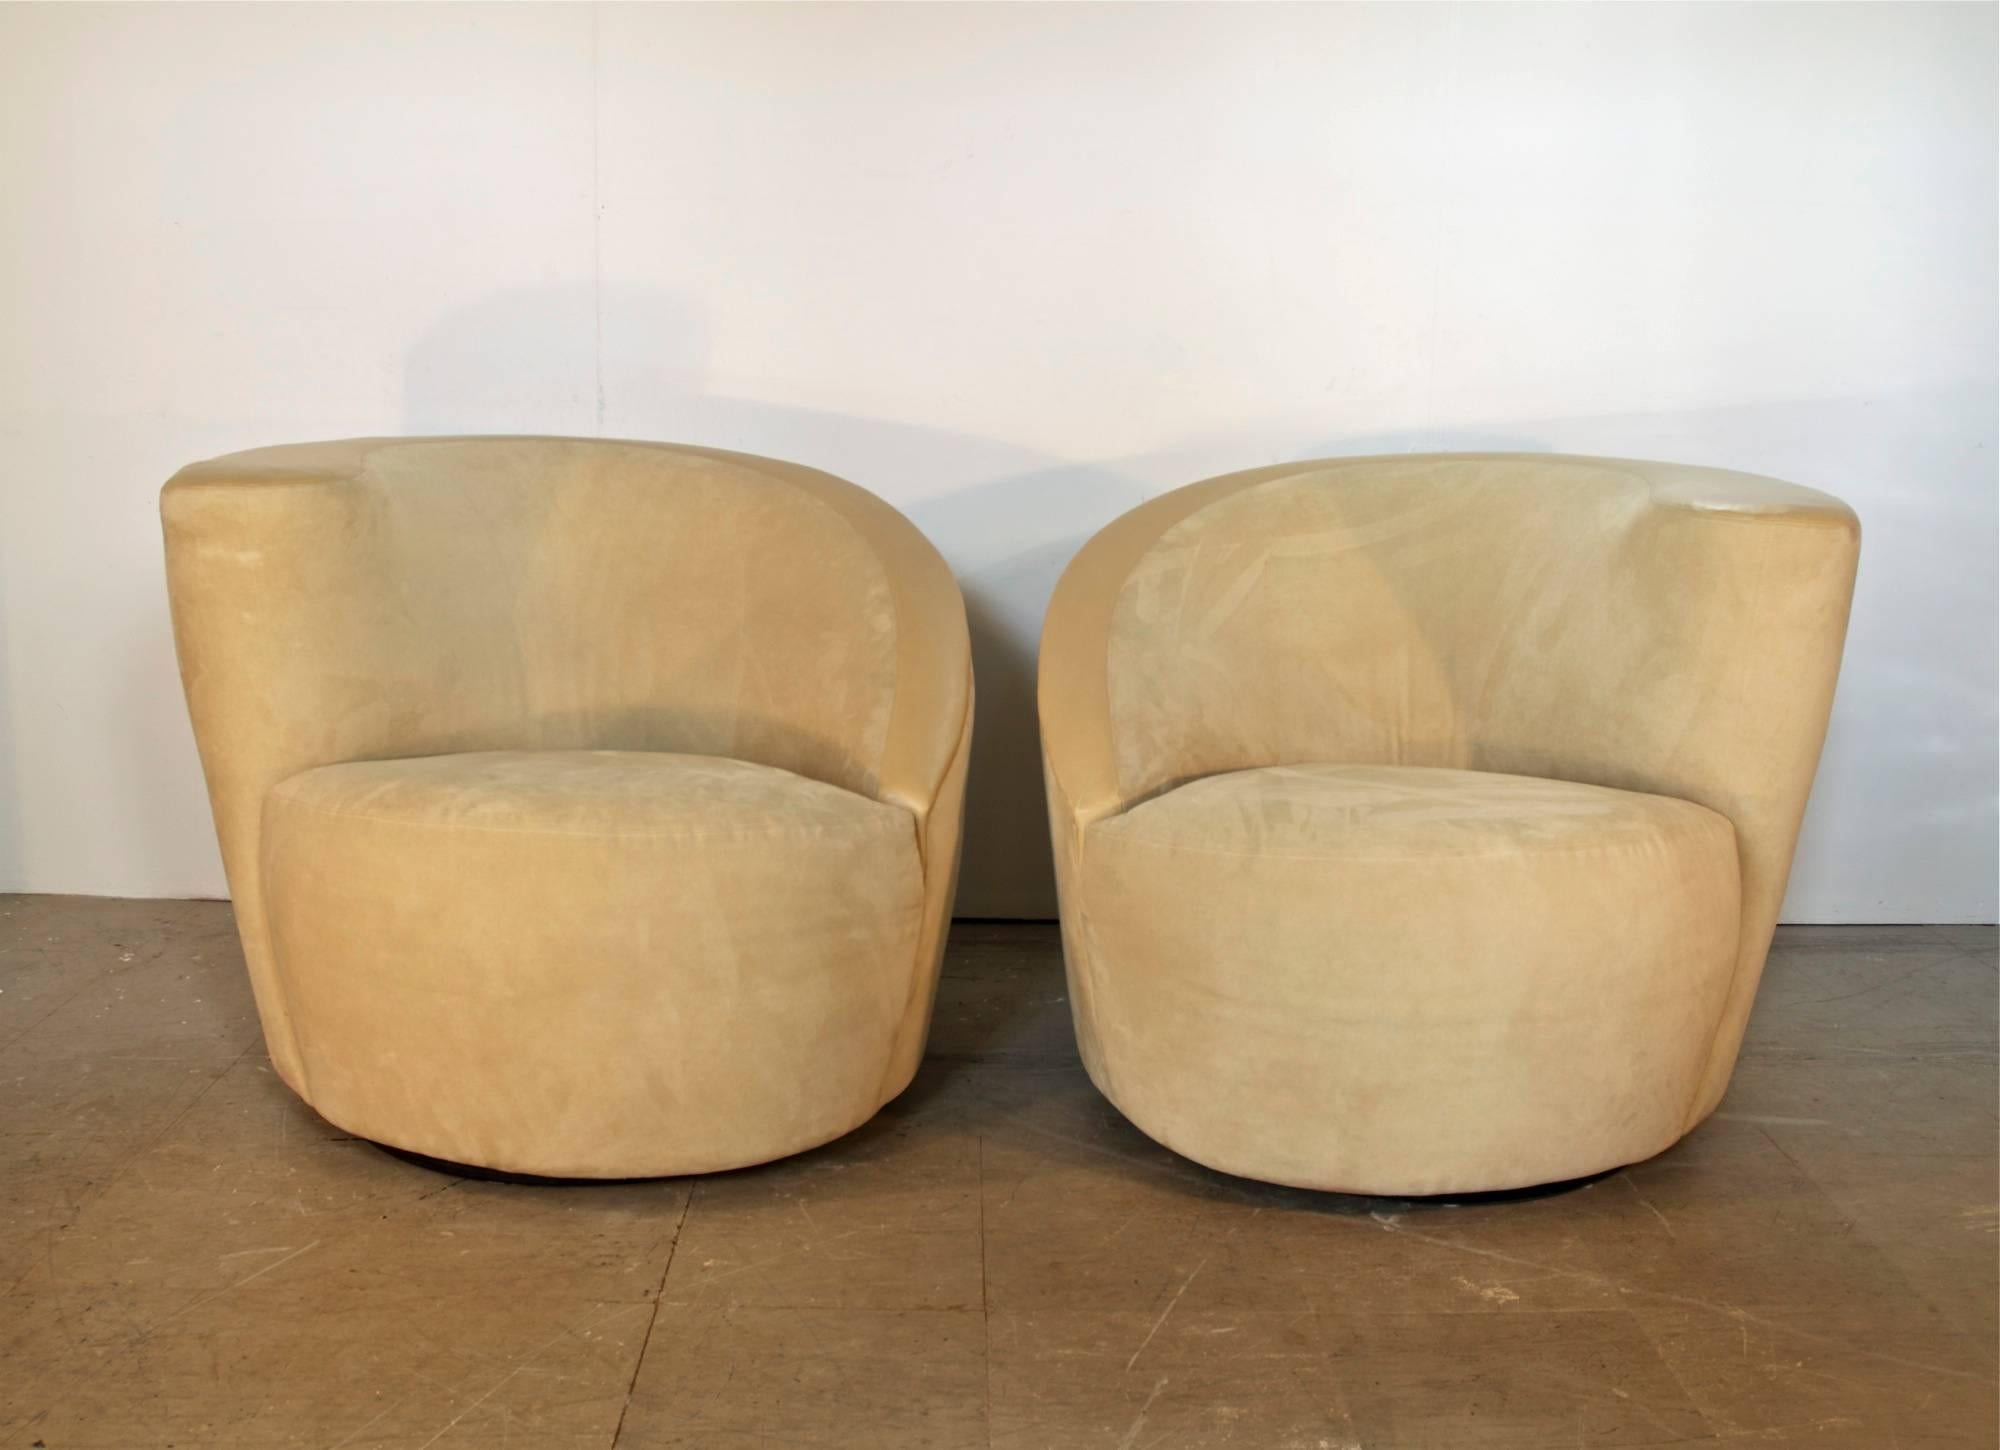 Pair of nautilus lounge chairs by Vladimir Kagan for Directional, circa late 1980s. The sculptural frames are upholstered in a plush cream microsuede which makes for very comfortable seating. The chair design exhibits smart spring loaded bases which